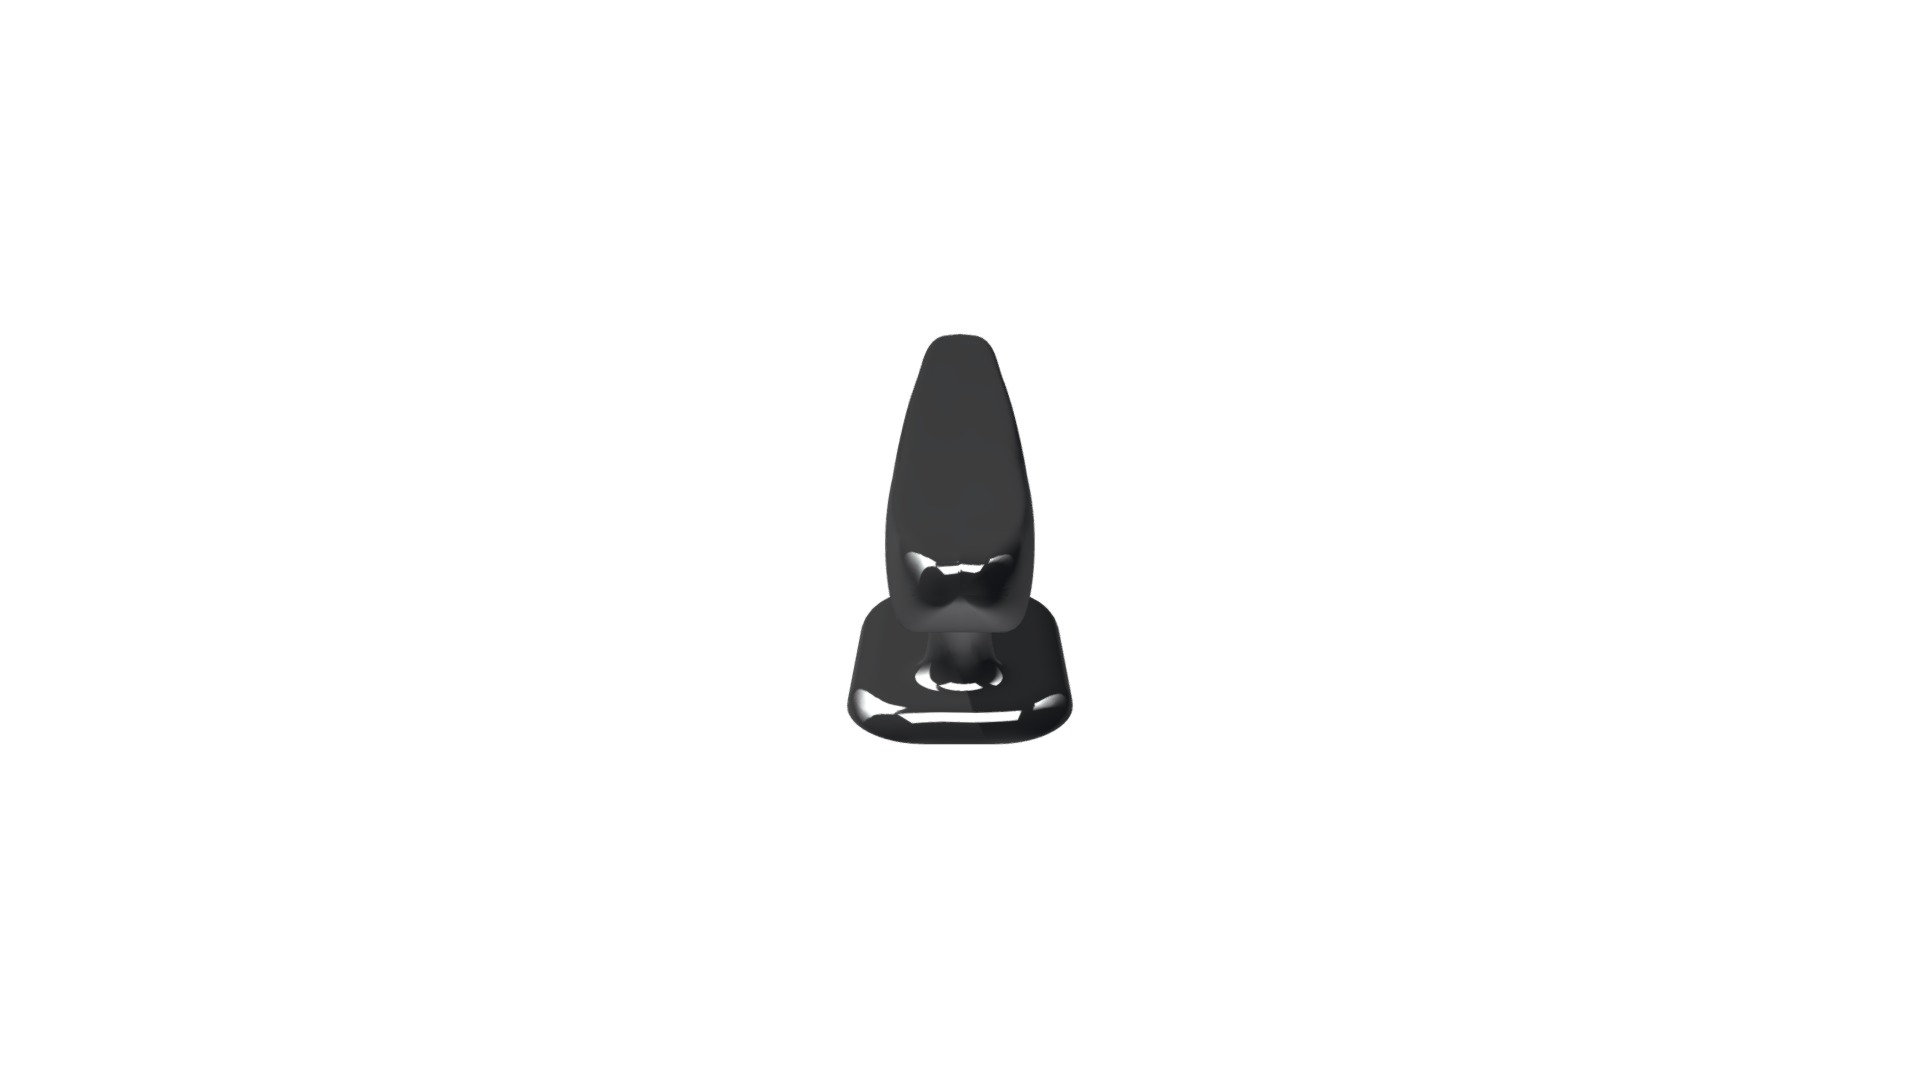 3D model Boat Cleat - This is a 3D model of the Boat Cleat. The 3D model is about a black hat with a black band.